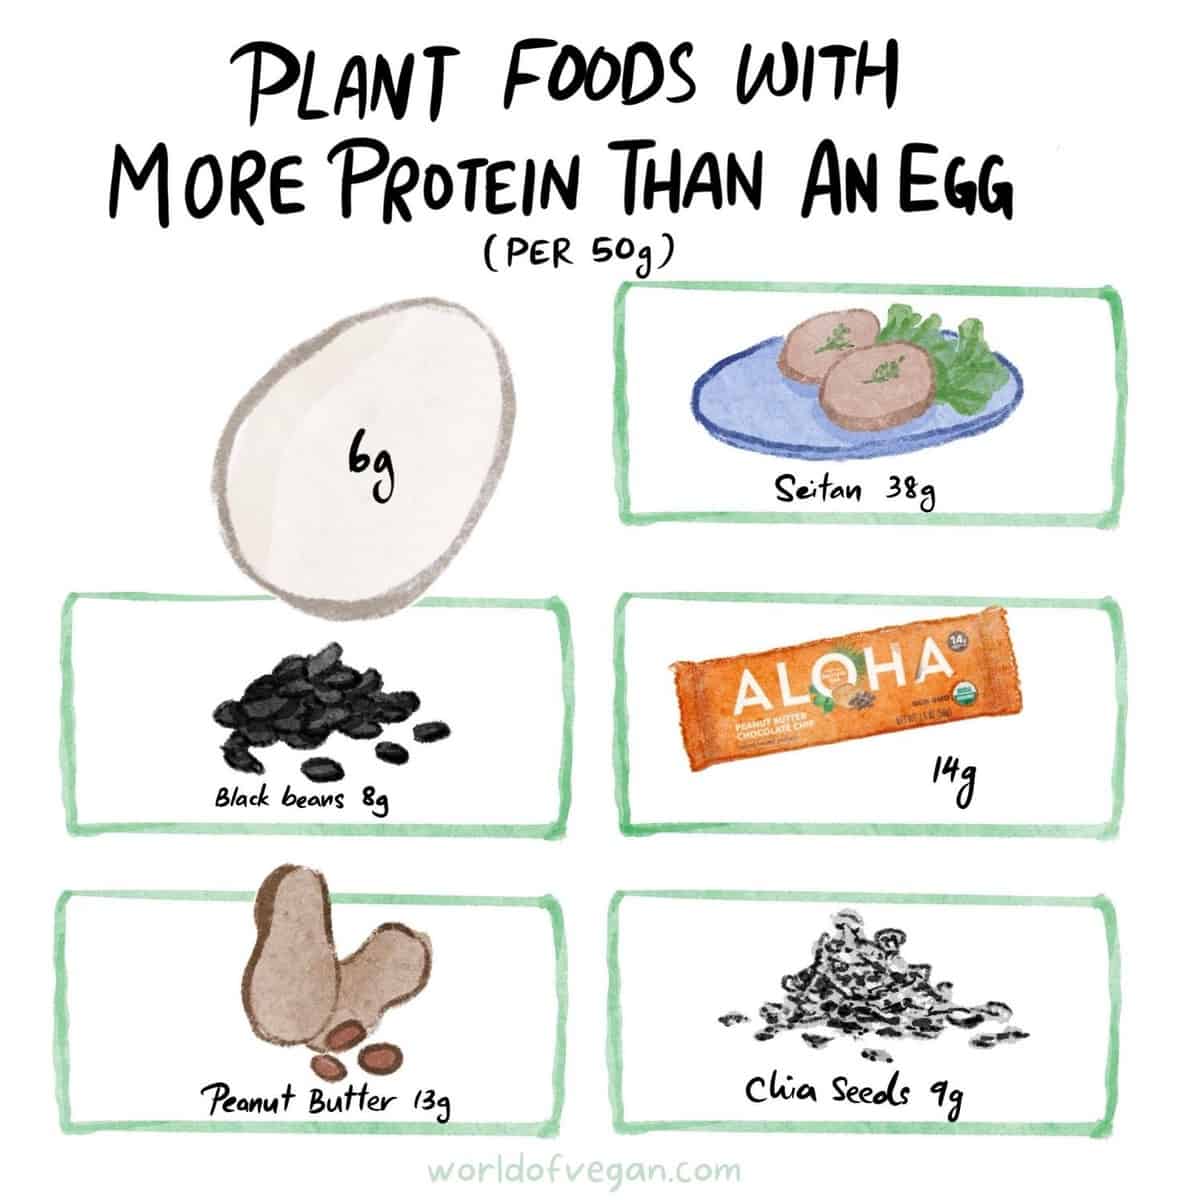 Vegan art graphic showing plant-based foods with more protein per serving than an egg. 